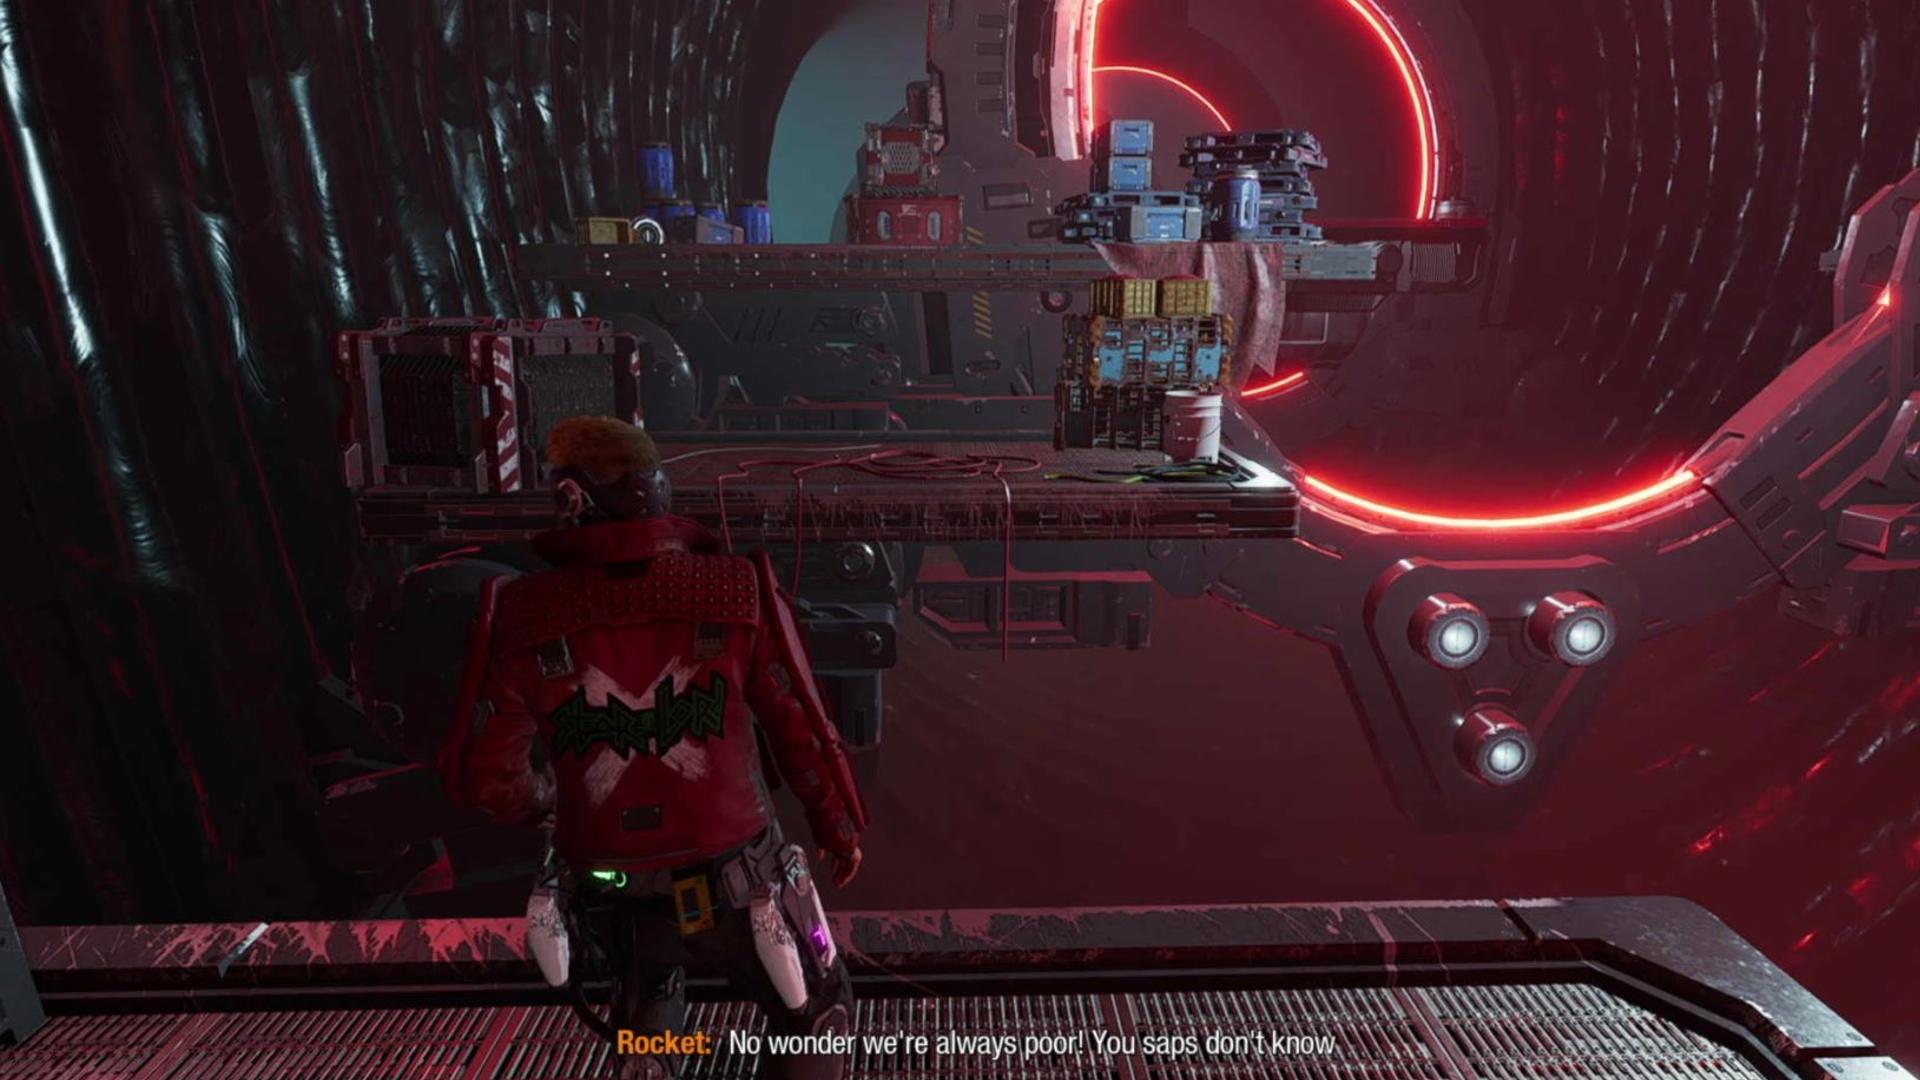 Guardians of the Galaxy outfit locations: Star-Lord is staring at a platform where the chest is located. 